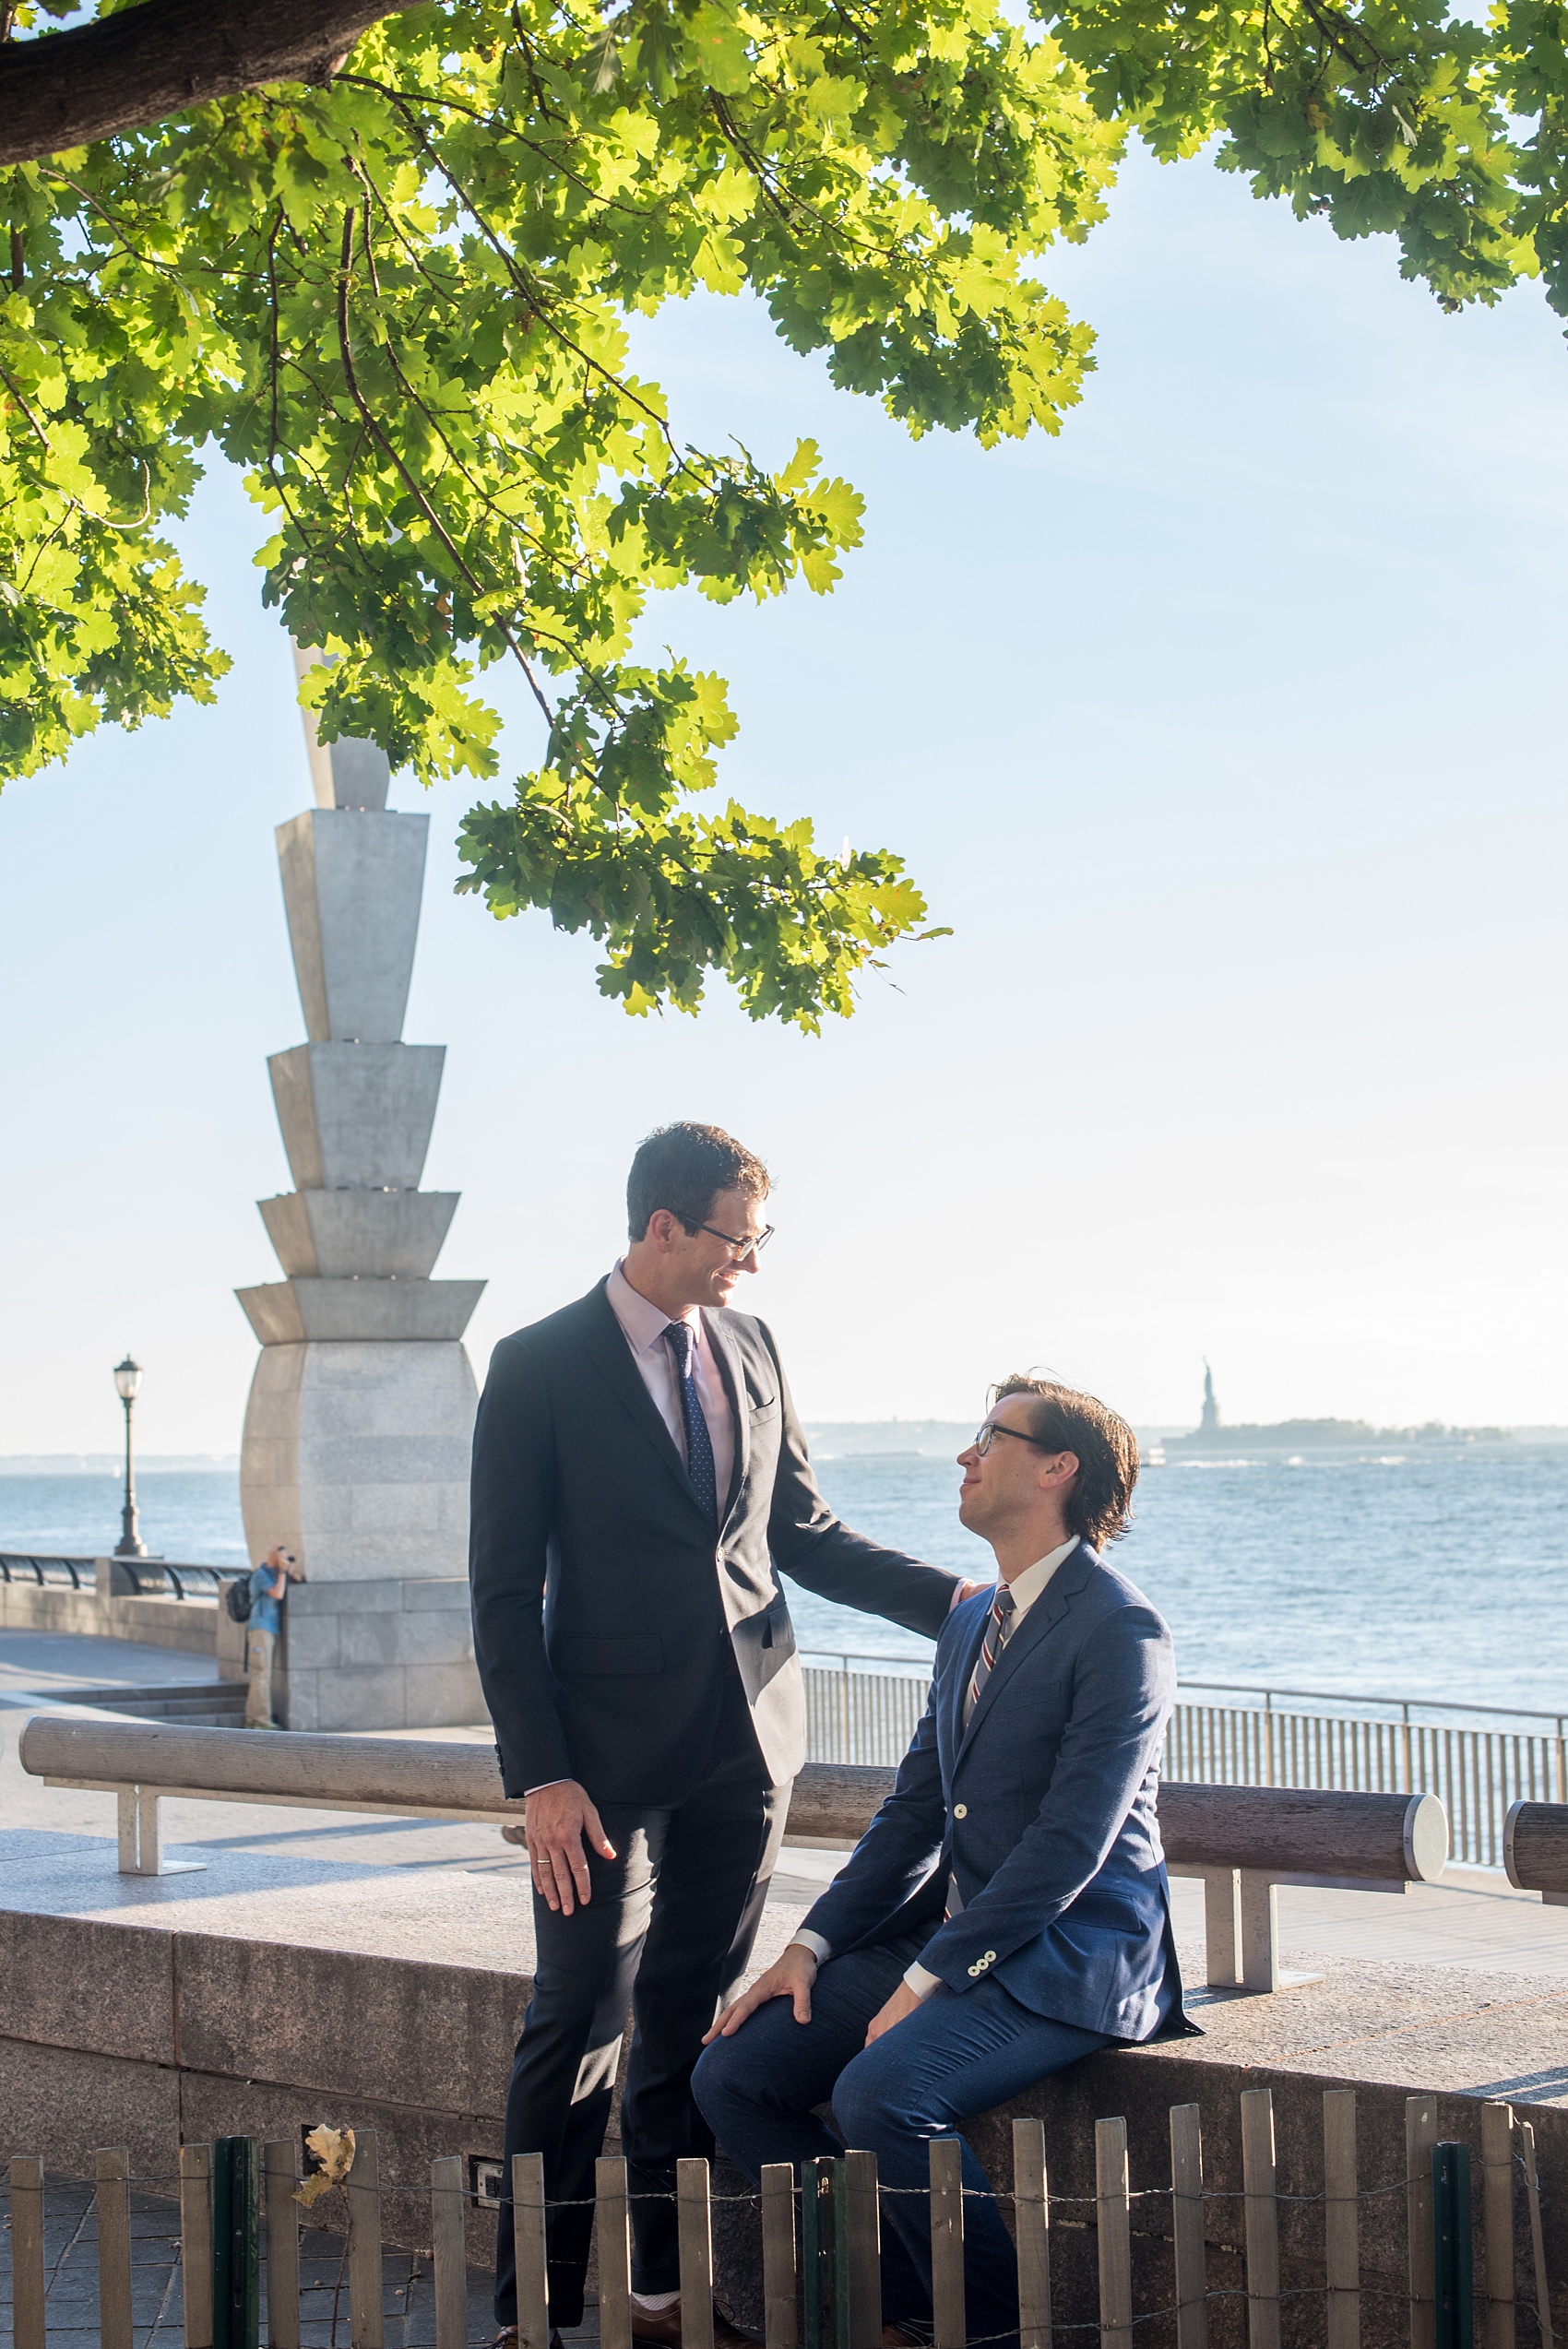 Mikkel Paige Photography photos of a same sex, gay engagement session in lower Manhattan's financial district with the grooms in custom suits.